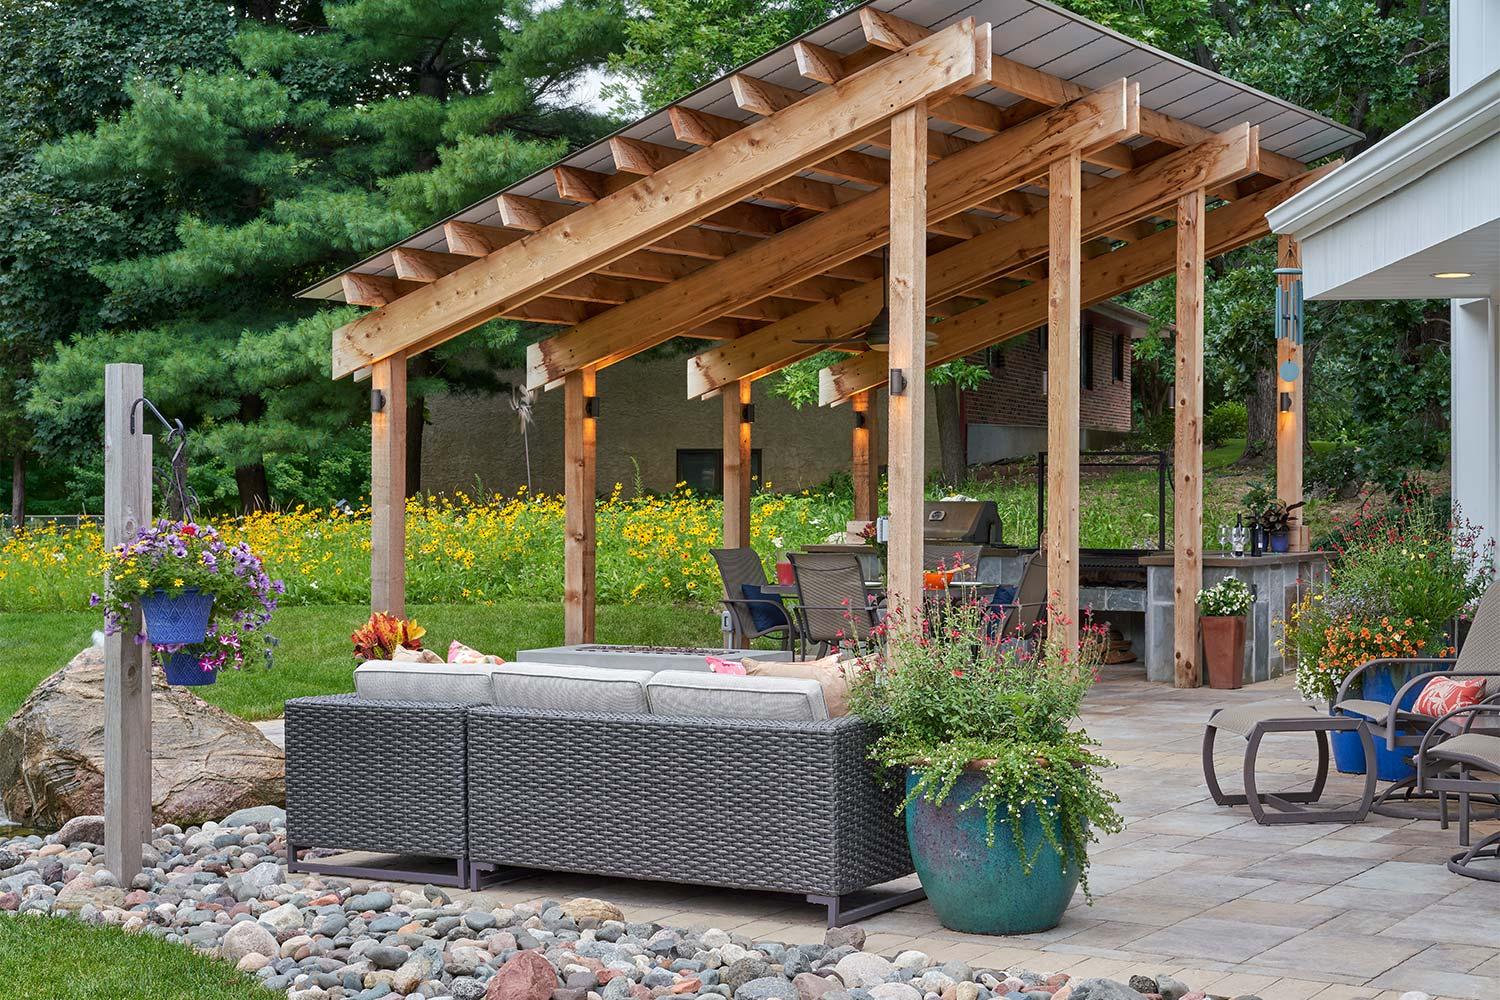 Outdoor kitchen under a modernist shade structure. Native yellow wildflowers in the background define the border between properties.